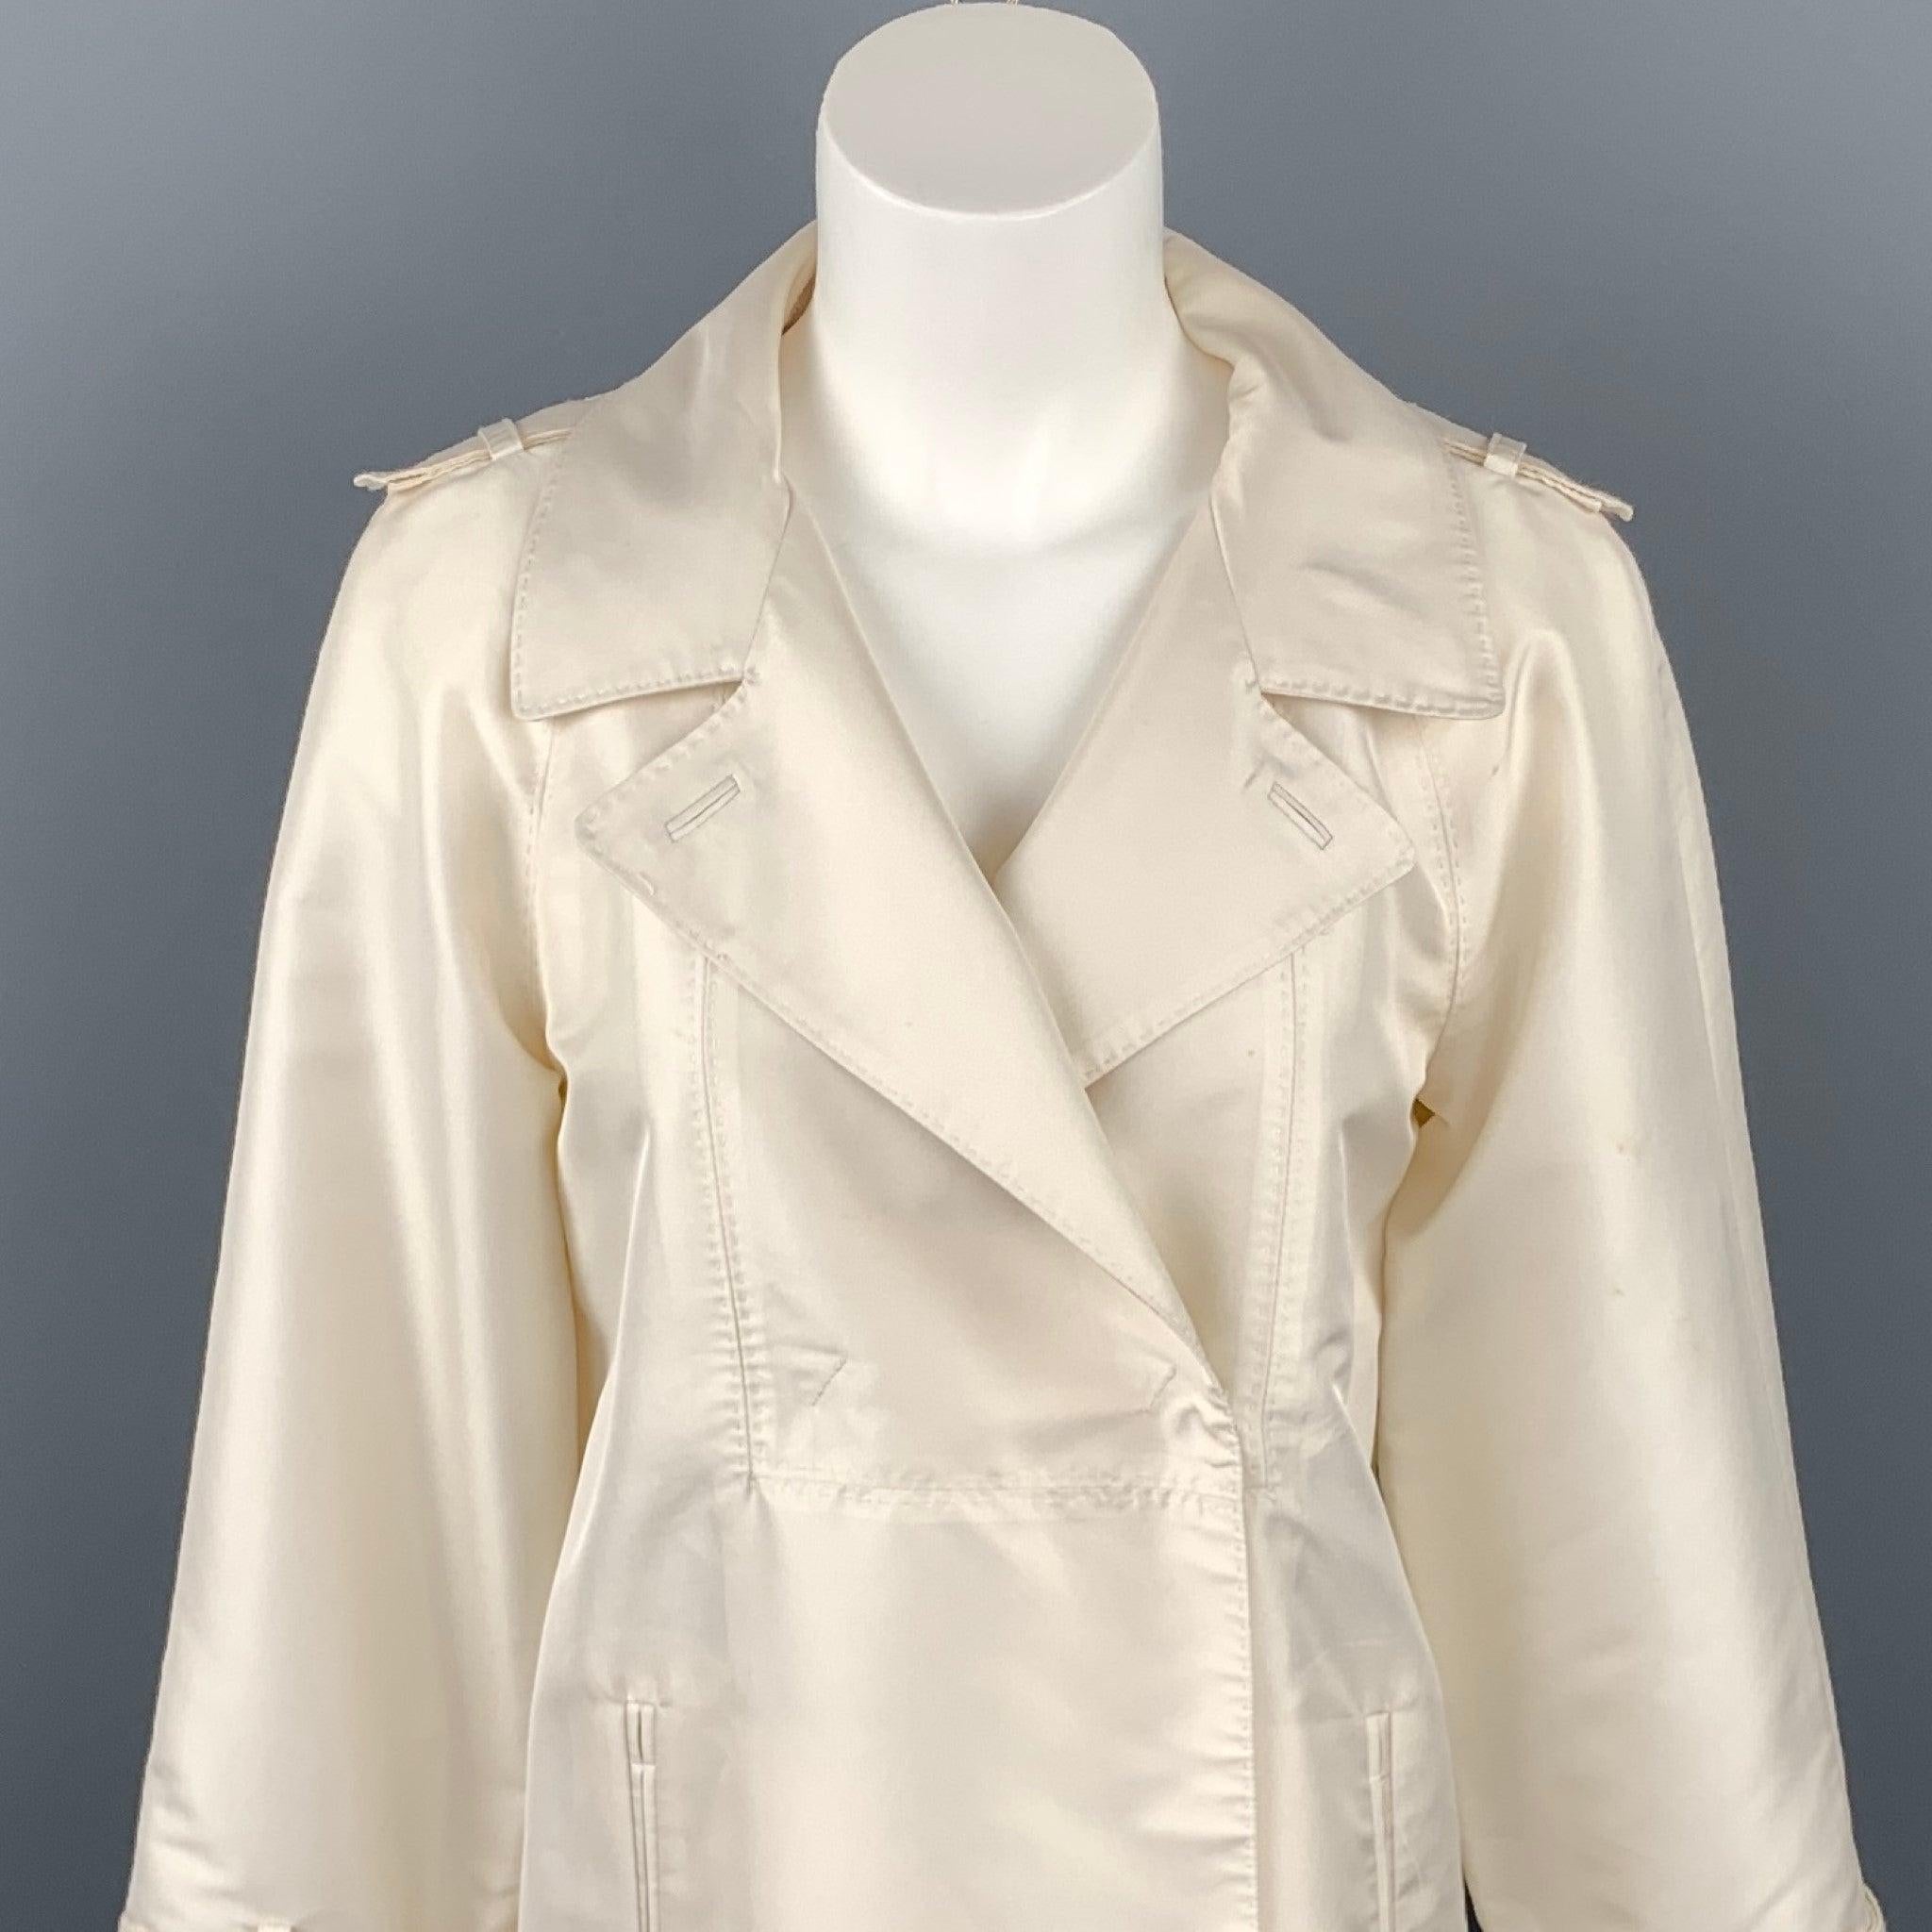 CoSTUME NATIONAL jacket comes in a cream twill polyester with a half liner featuring a notch lapel, epaulettes, slit pockets, and a hidden double breasted closure. Discoloration throughout. Made in Italy.Good Pre-Owned Condition. 

Marked:   IT 38